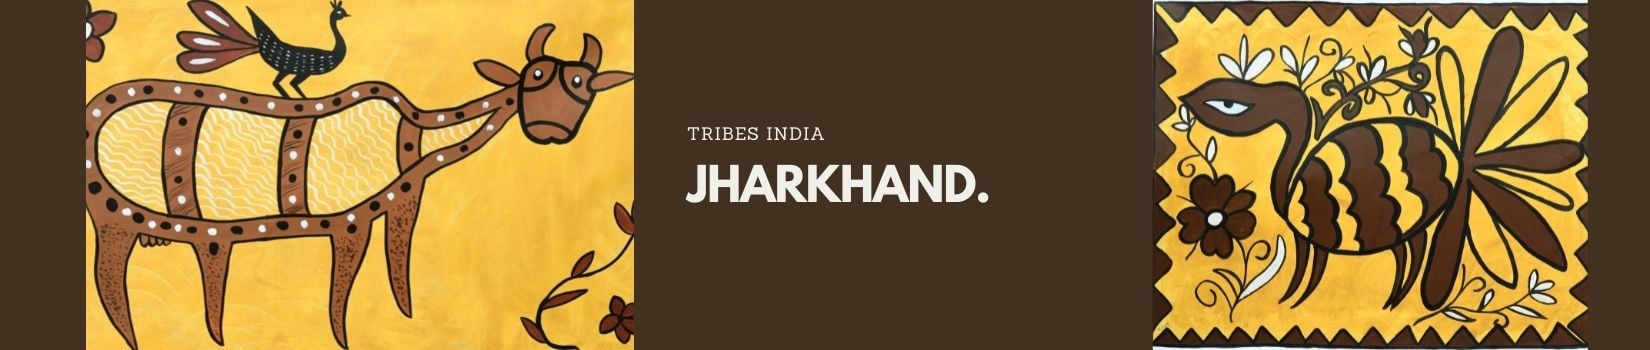 Tribes India Jharkhand